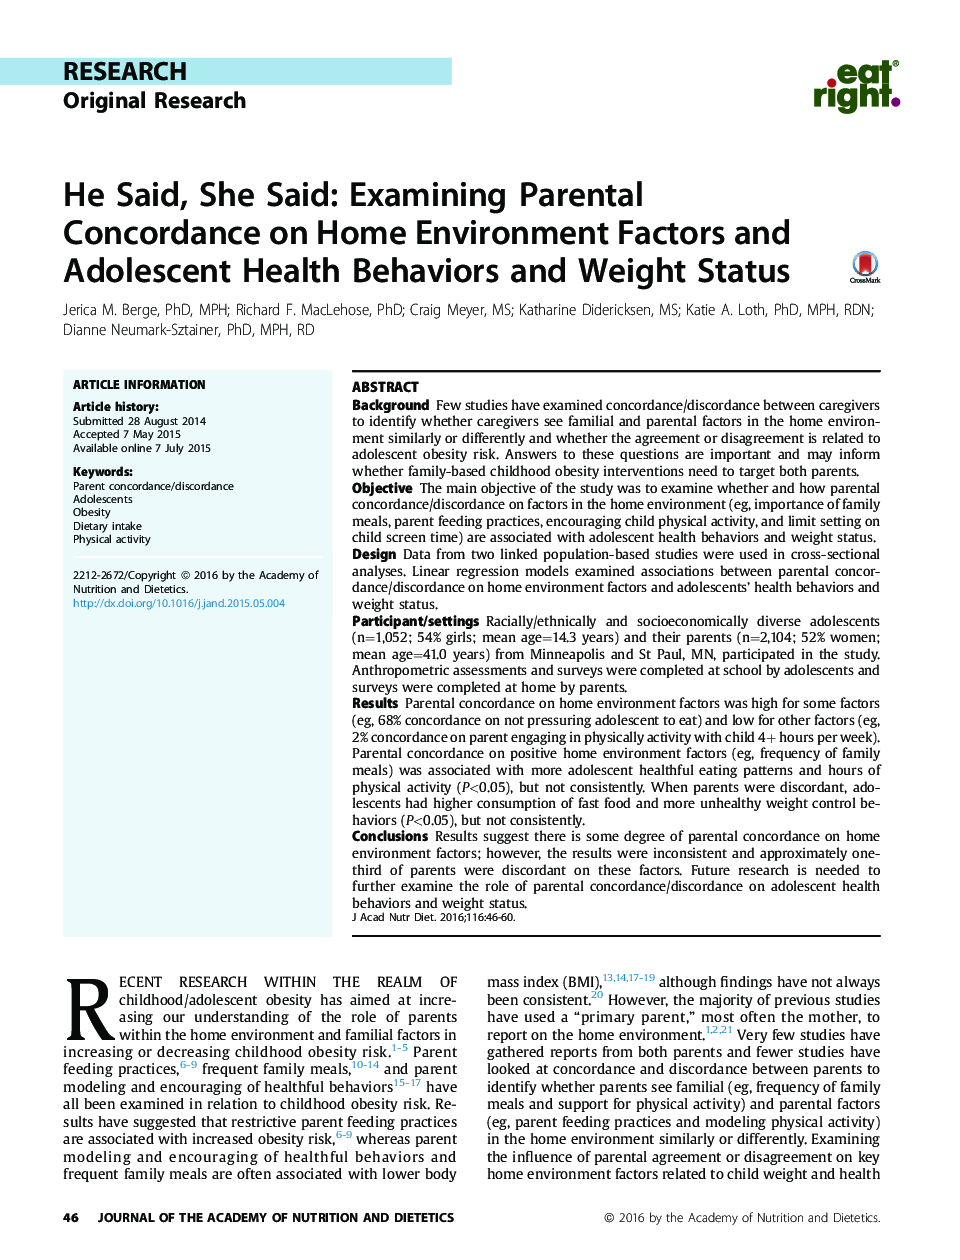 He Said, She Said: Examining Parental Concordance on Home Environment Factors and Adolescent Health Behaviors and Weight Status 